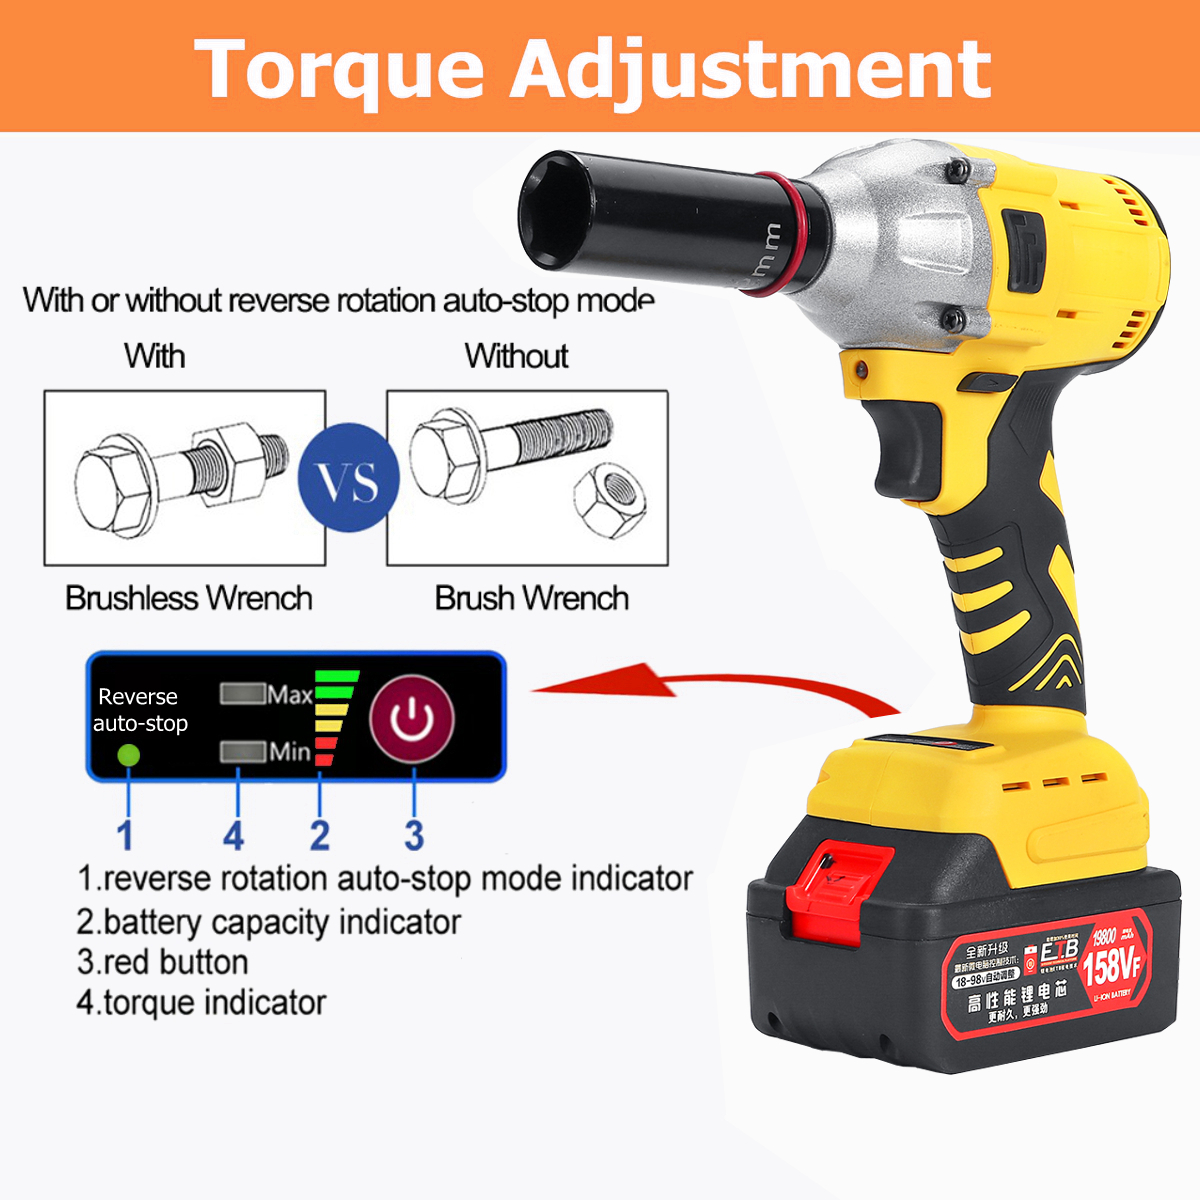 158VF-19800mAh-Cordless-Brushless-Impact-Wrench-Power-Driver-Electric-Wrench-Socket-Battery-Hand-Dri-1545779-1